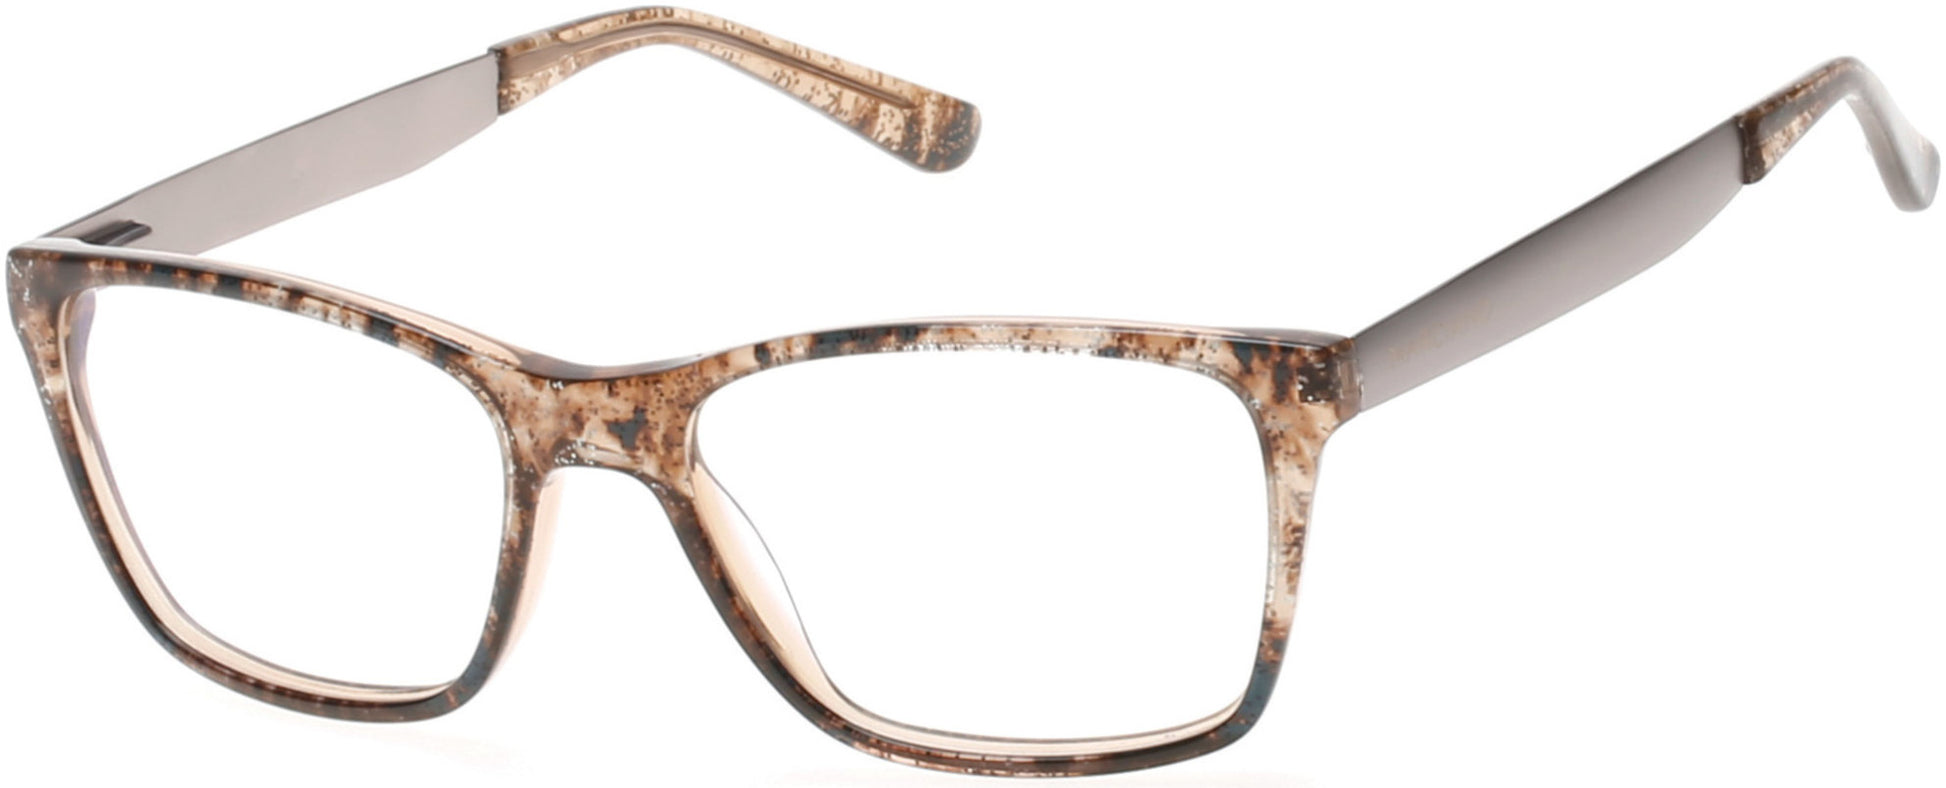 Guess By Marciano GM0256 Eyeglasses 047-047 - Light Brown/other